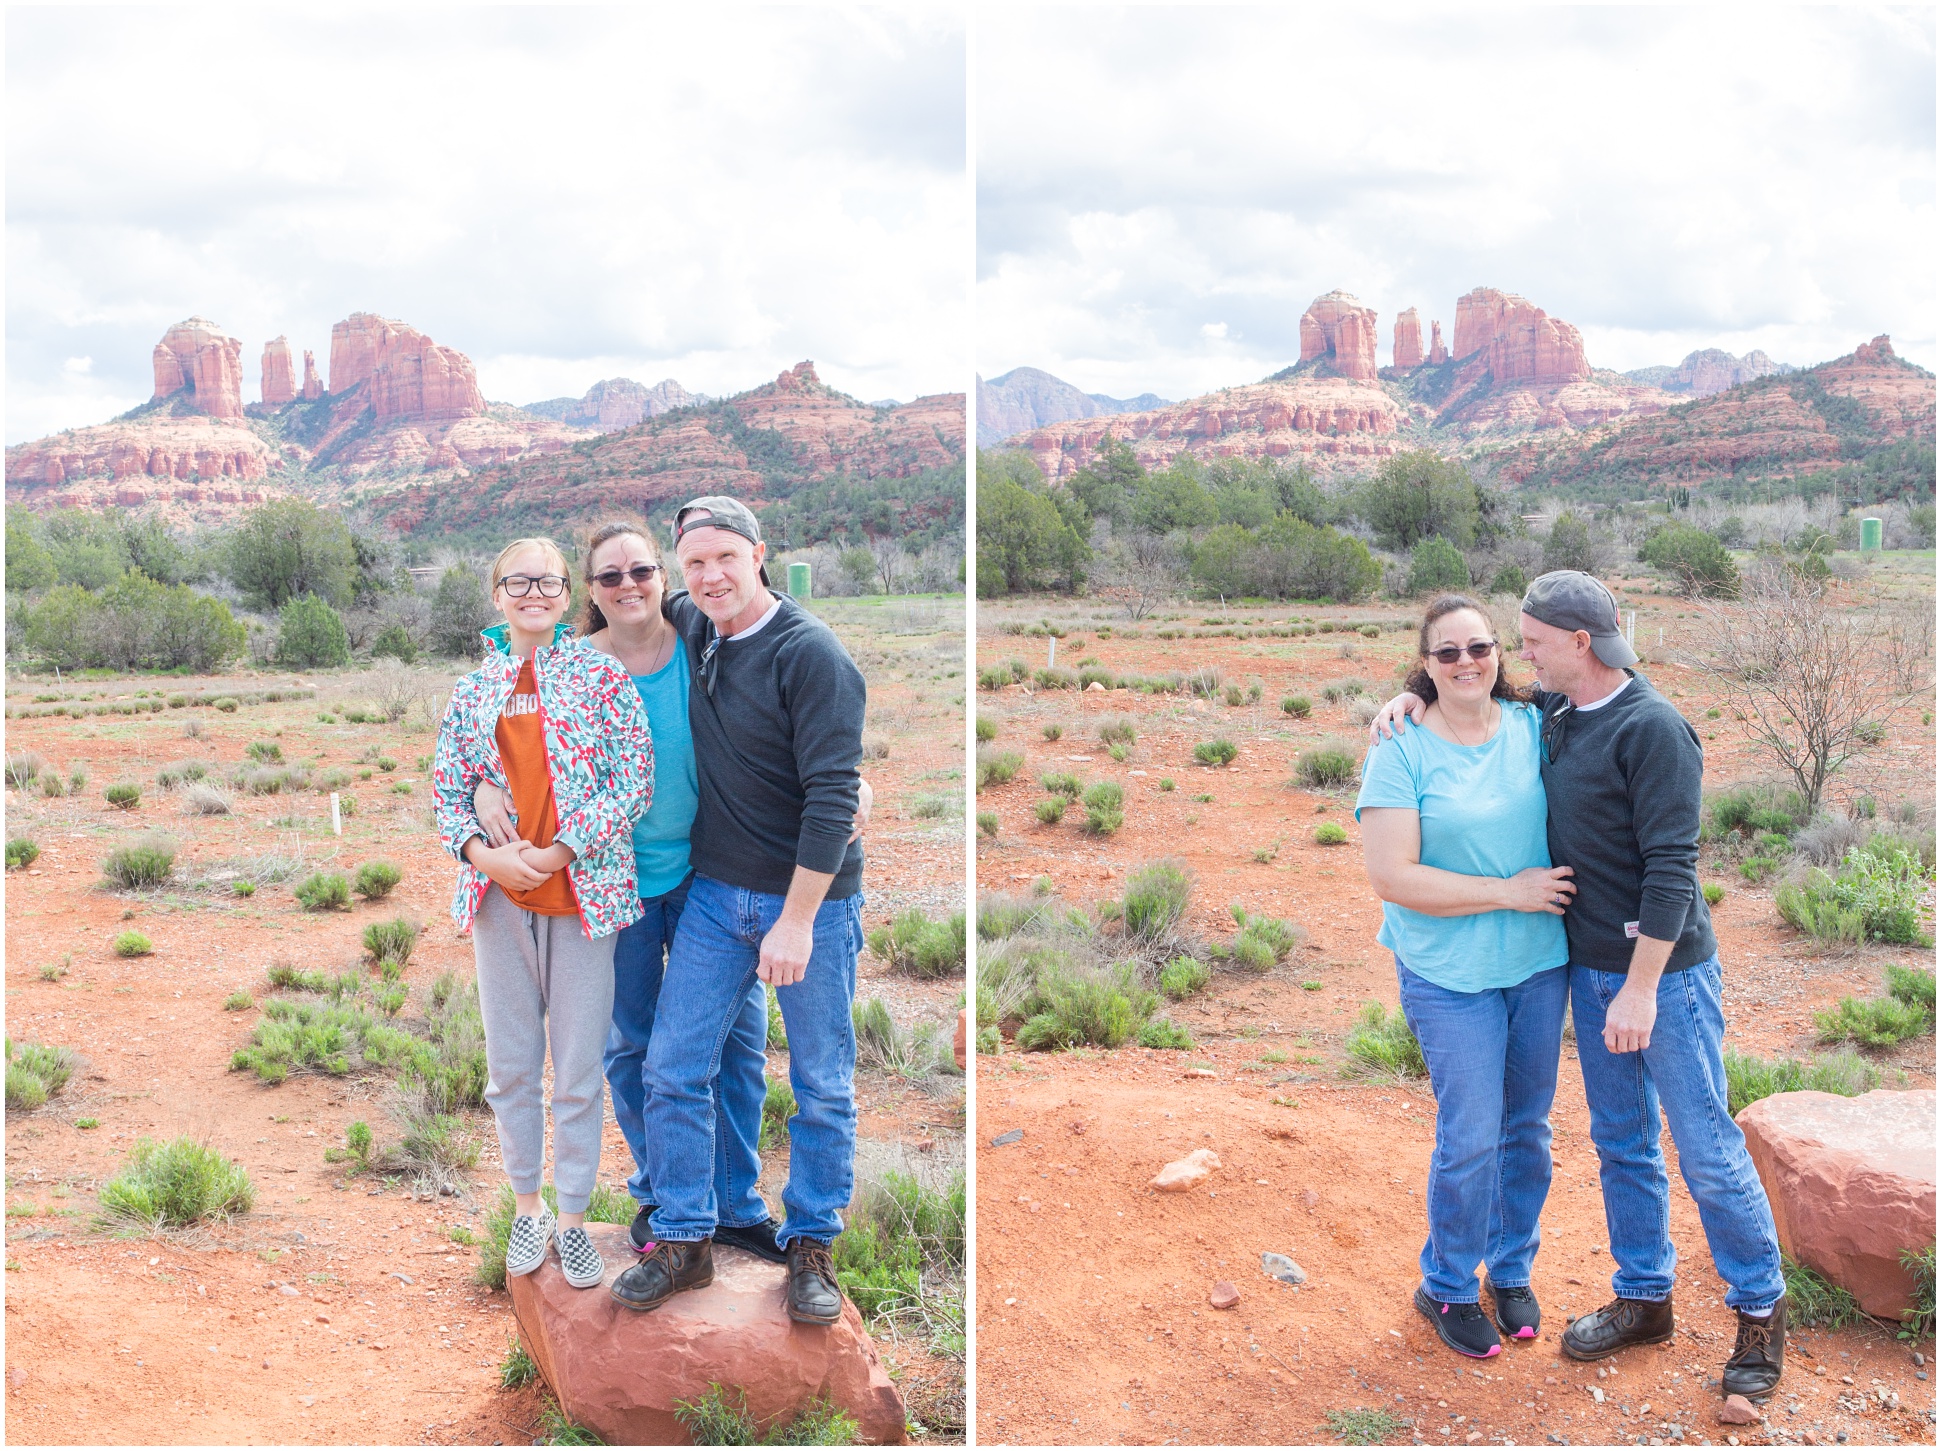 Two images of my family members, daughter, mom, dad, in front of the red rocks in Sedona